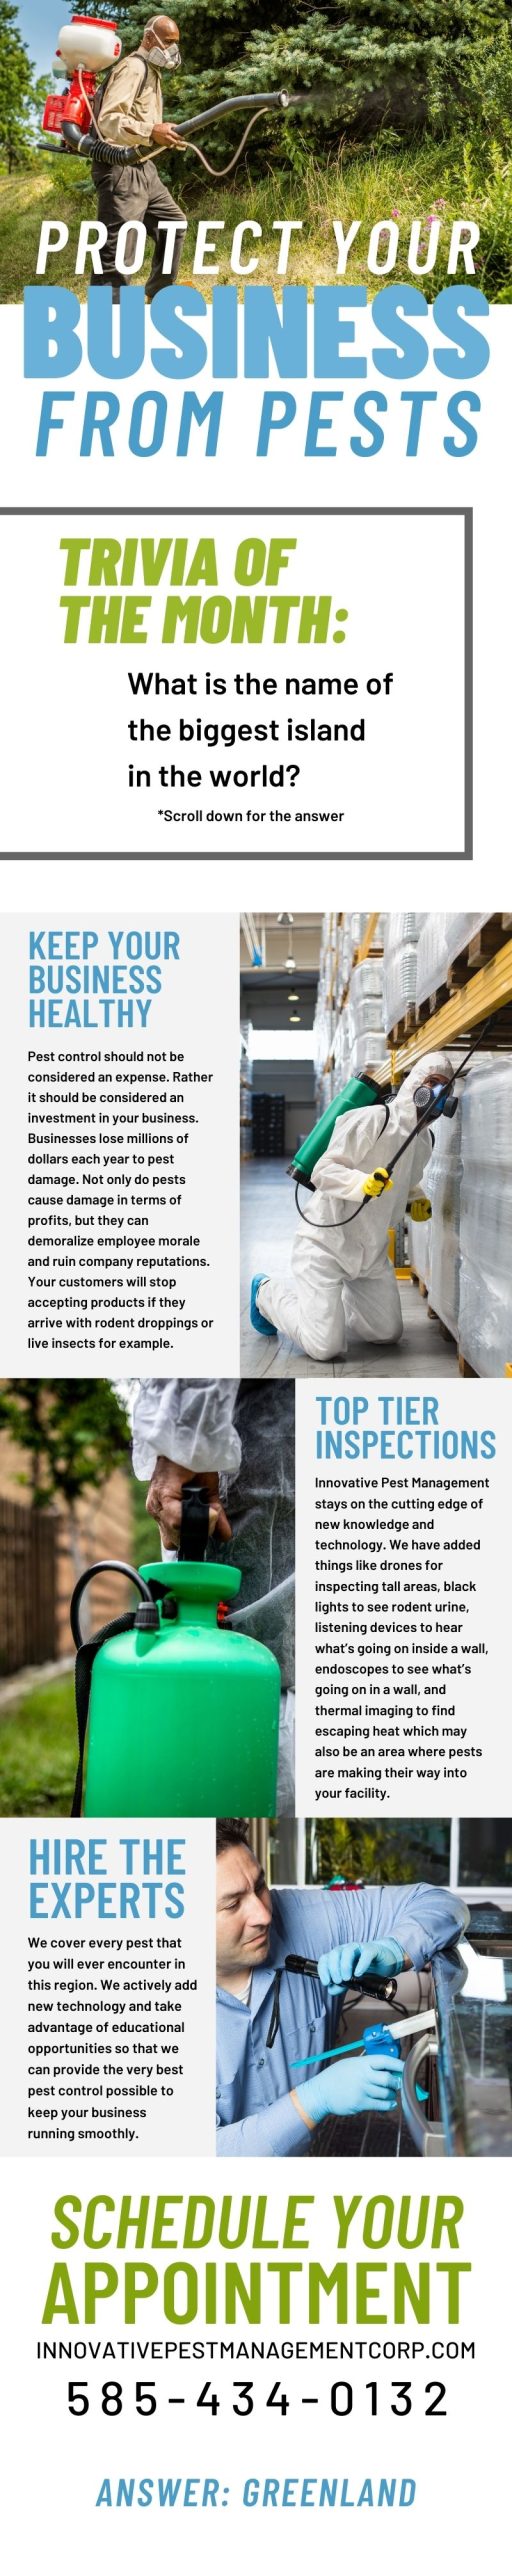 Protect Your Business from Pests! 3